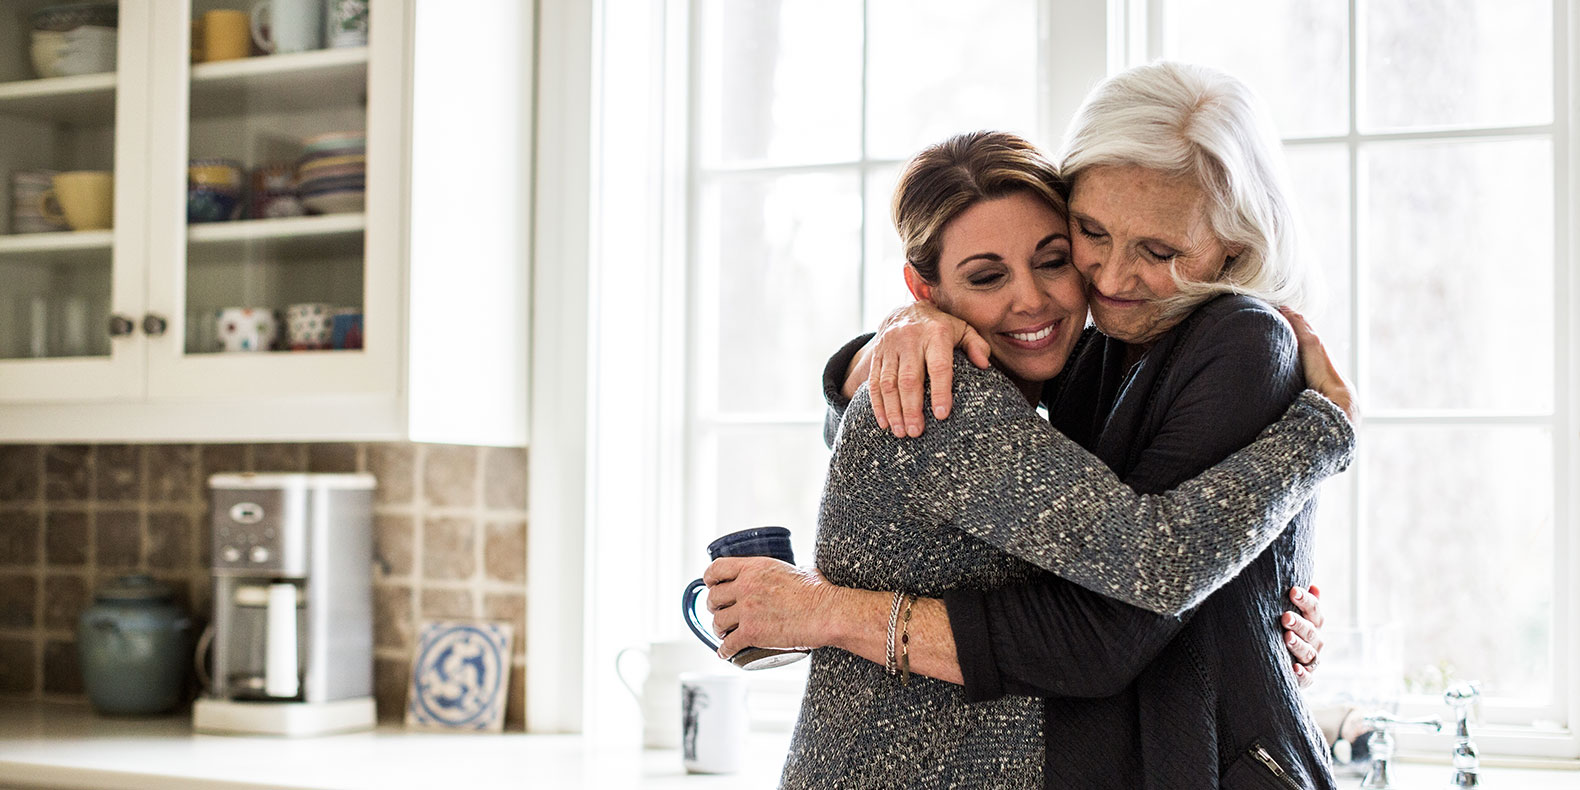 The Benefits of Video Surveillance for Caregivers